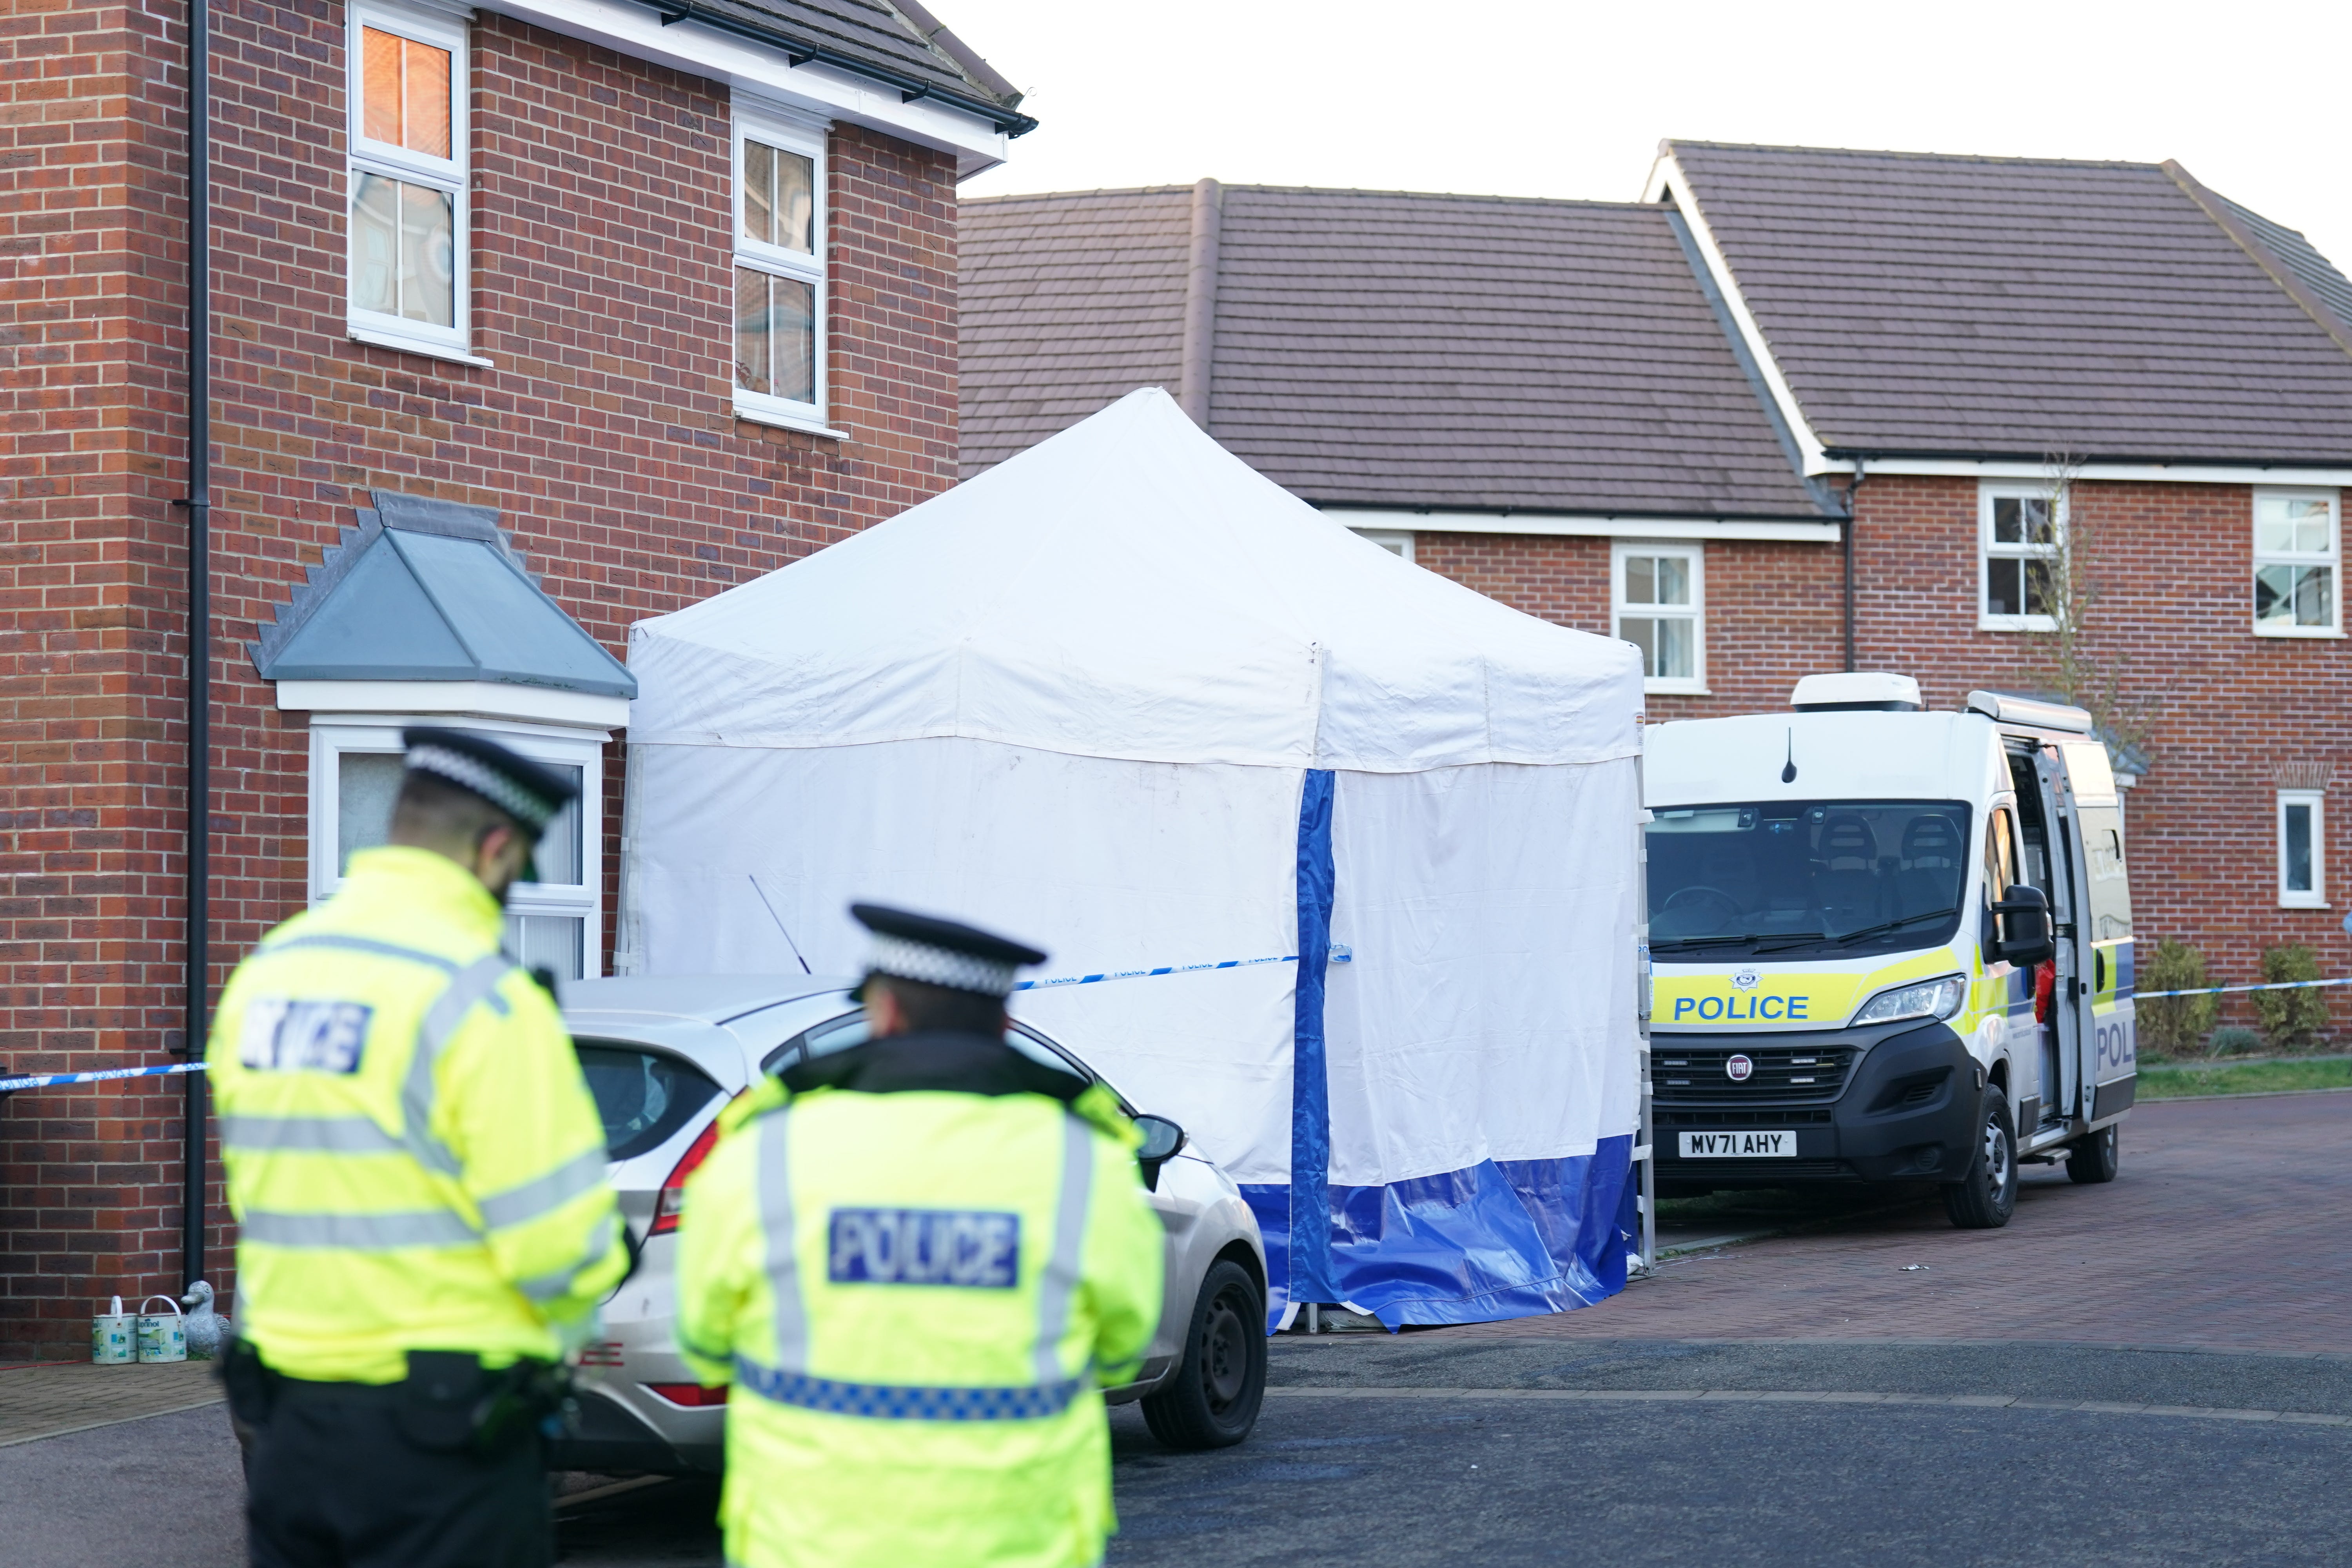 Police outside a house in Costessey near Norwich after four people were found dead inside the property (Joe Giddens/PA)